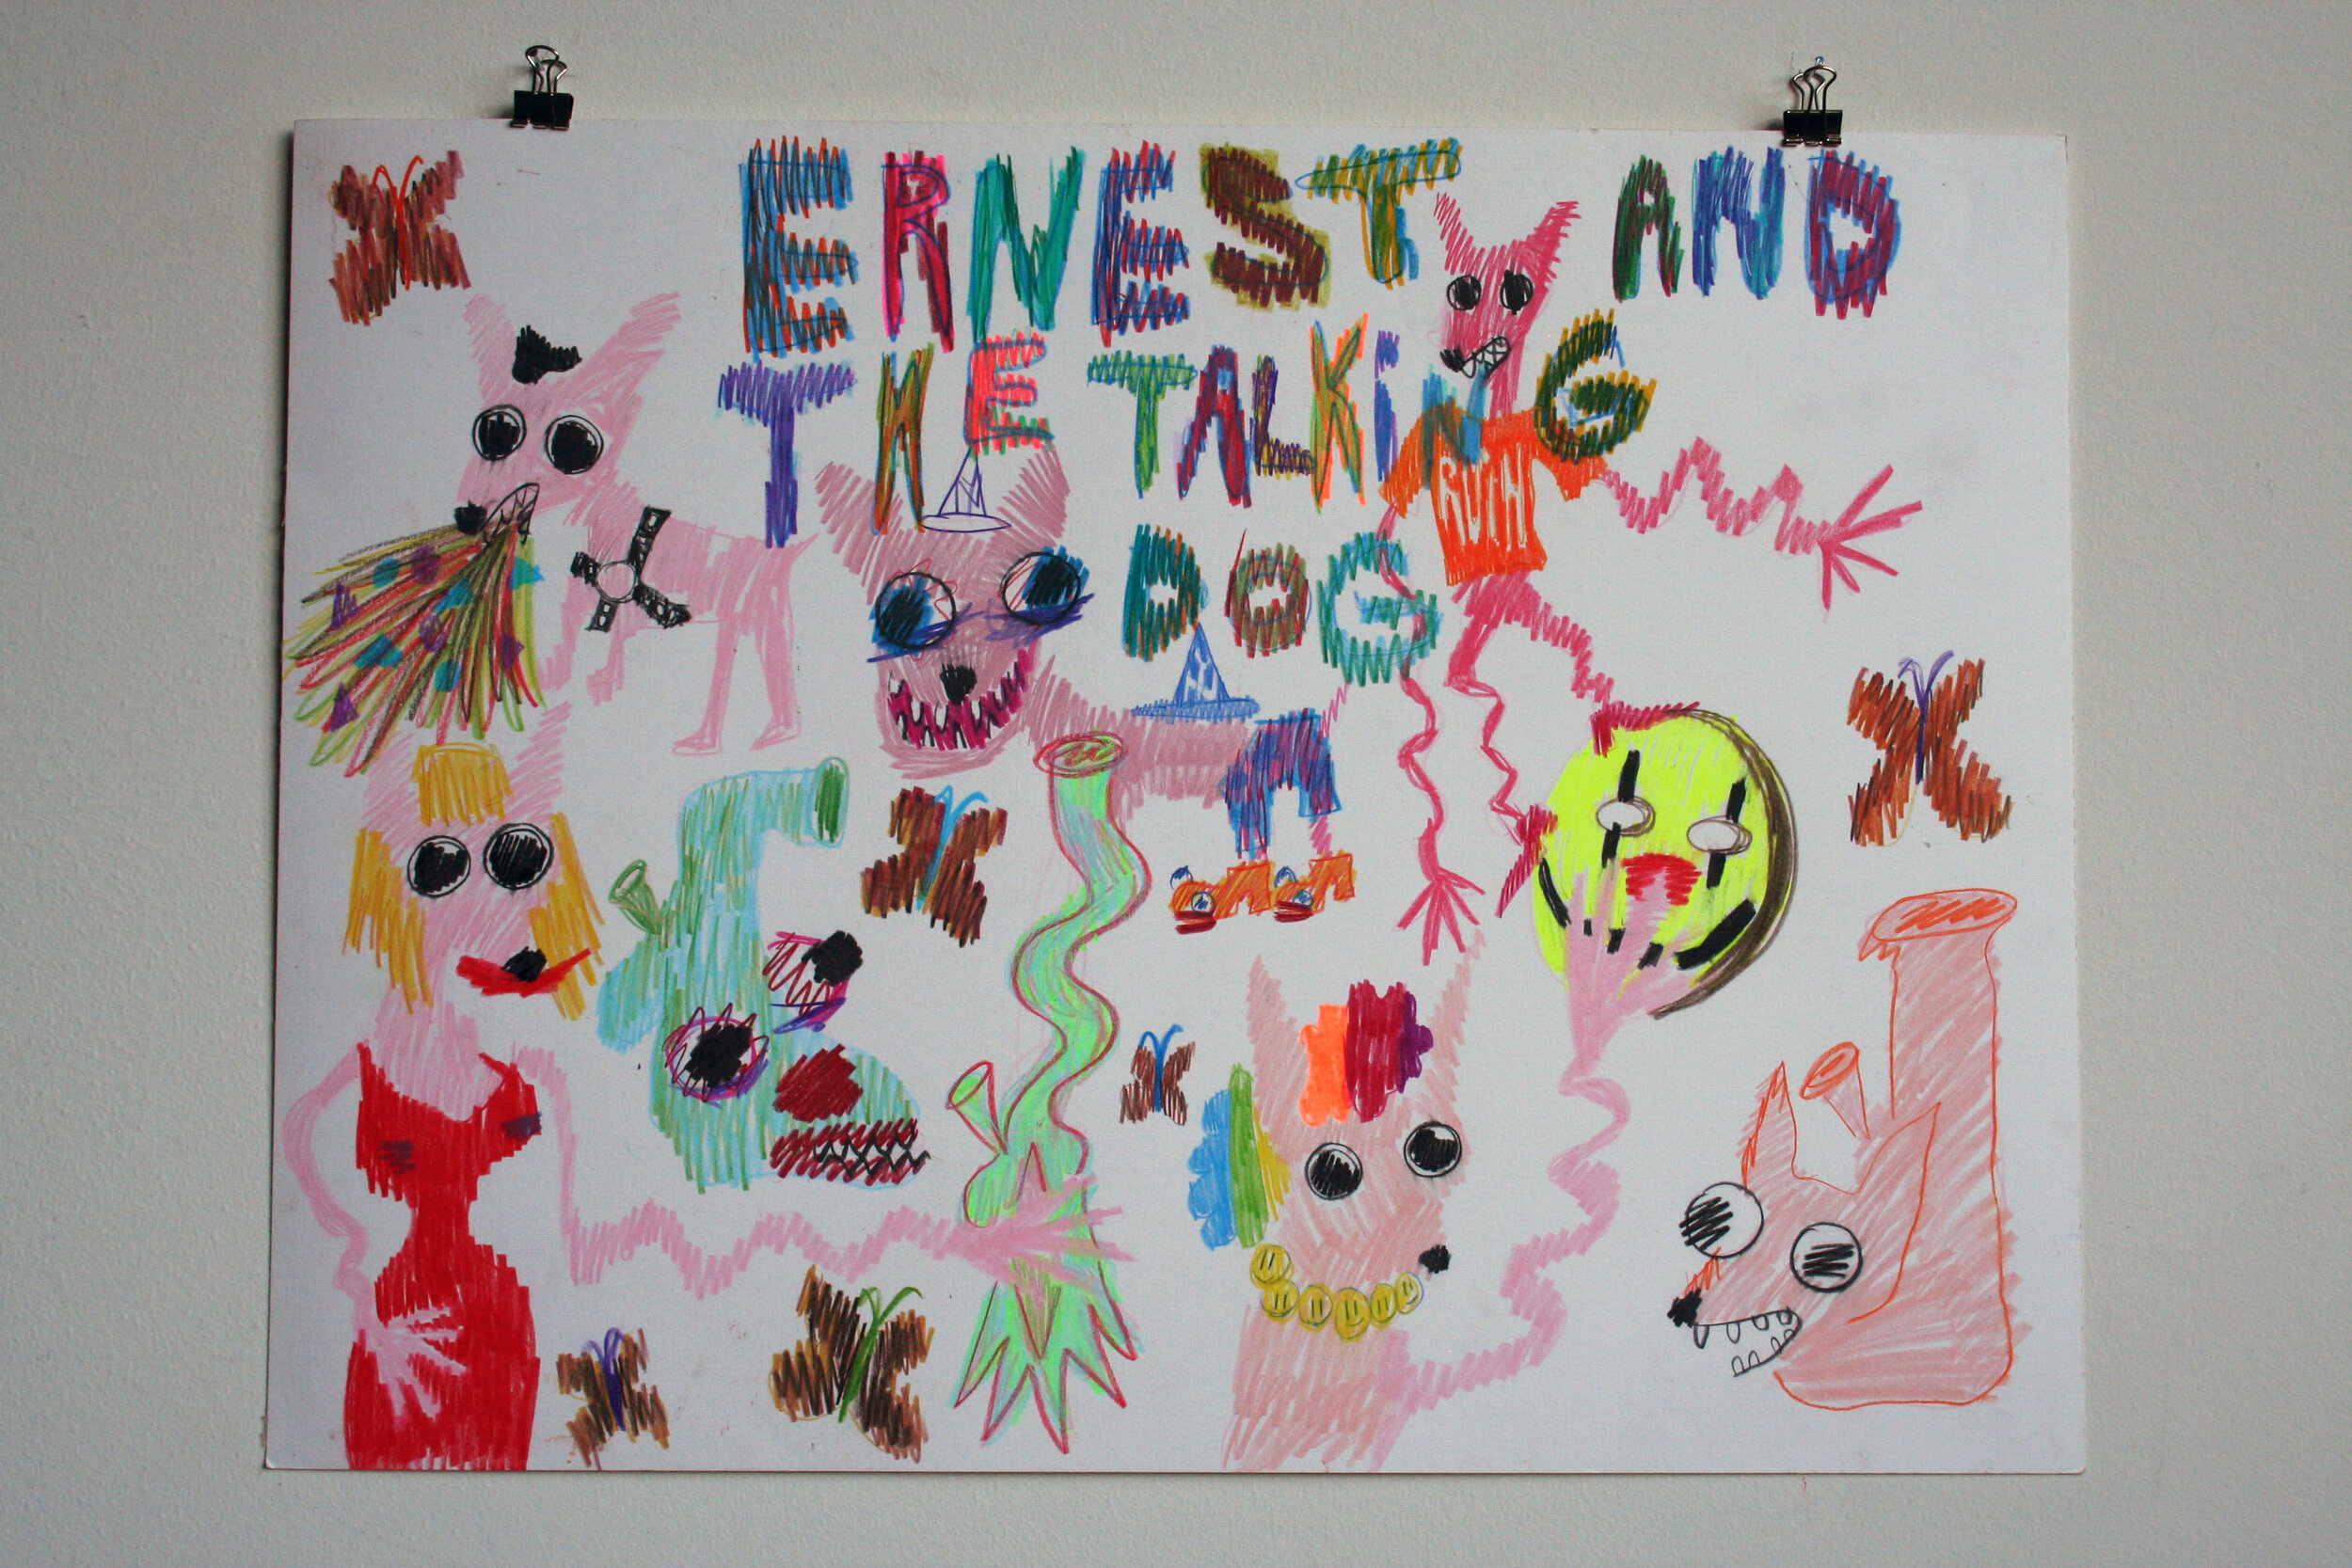   Ernest and the Talking Dog Movie Poster , 2013  18 x 24 inches (45.72 x 60.96 cm.)  Colored pencil on paper 